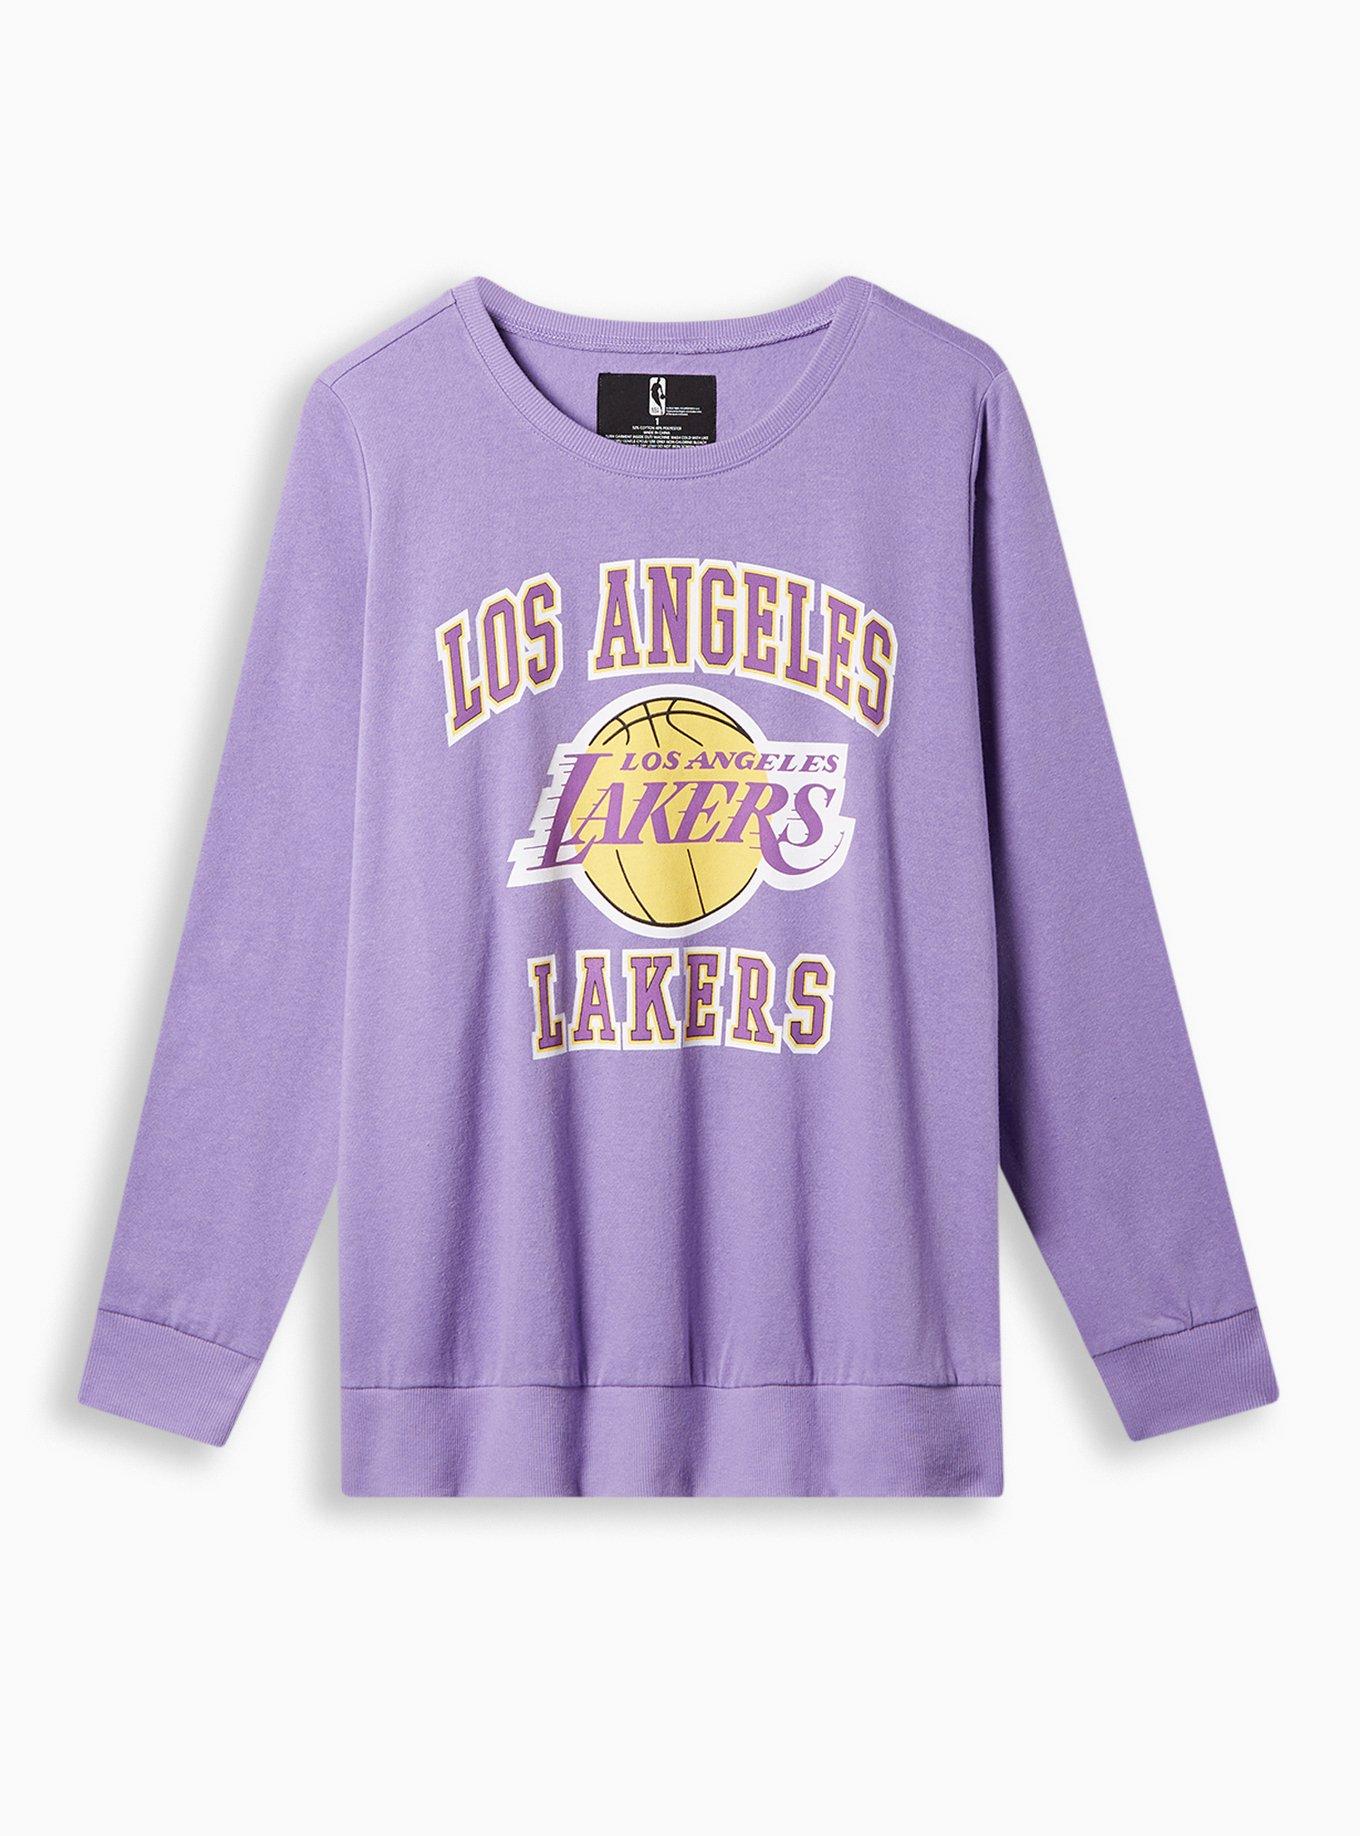 Best Selling Product] Los Angeles Lakers Champions Nba Western Best Outfit  Hoodie Dress